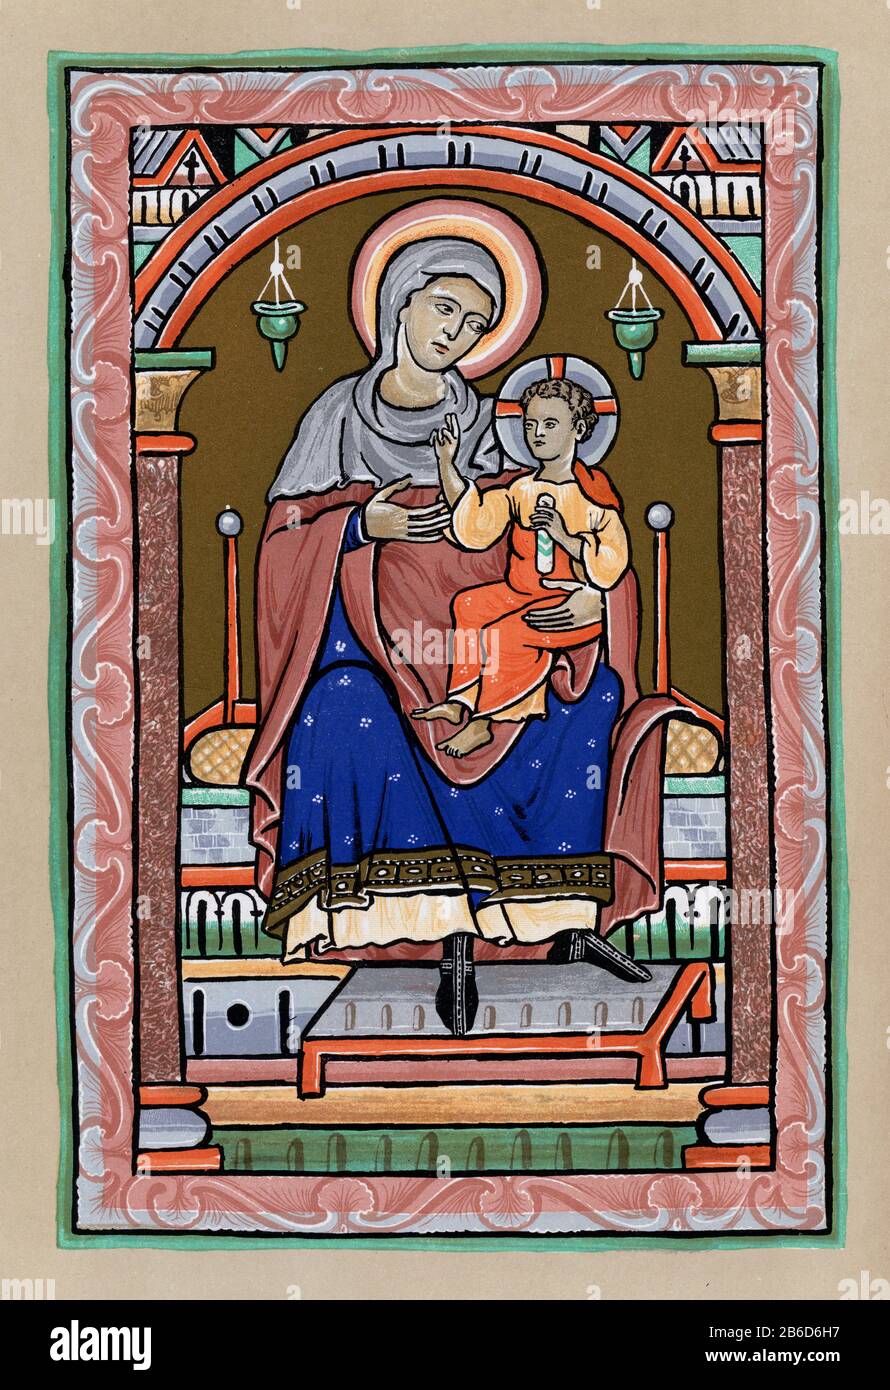 Prefatory miniature of the Virgin and Child, c1200. British Library shelfmark: Royal 2 A. XXII, f.13v. The Westminster Psalter is an English illuminated psalter. It is the oldest surviving psalter used at Westminster Abbey, and is presumed to have left Westminster after the Dissolution of the Monasteries. Stock Photo